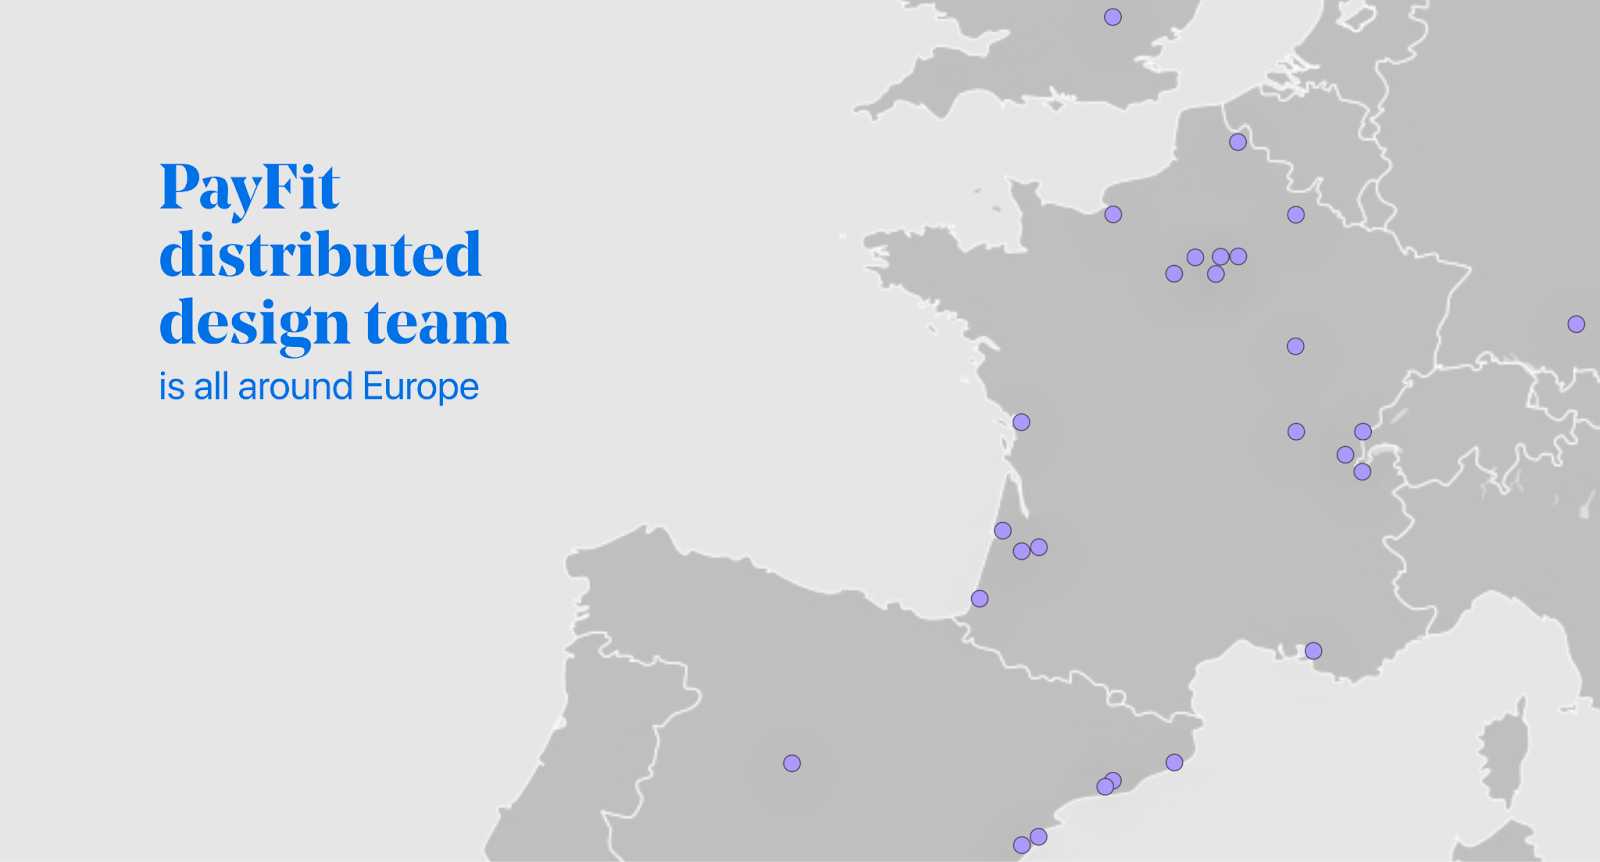 Distribution of PayFit team across Europe, in France (more than twenty locations in the North, South-West and East), Spain (6 dots in Northern Spain), the United Kingdom (one dot in the South), and Germany (one dot in the South).